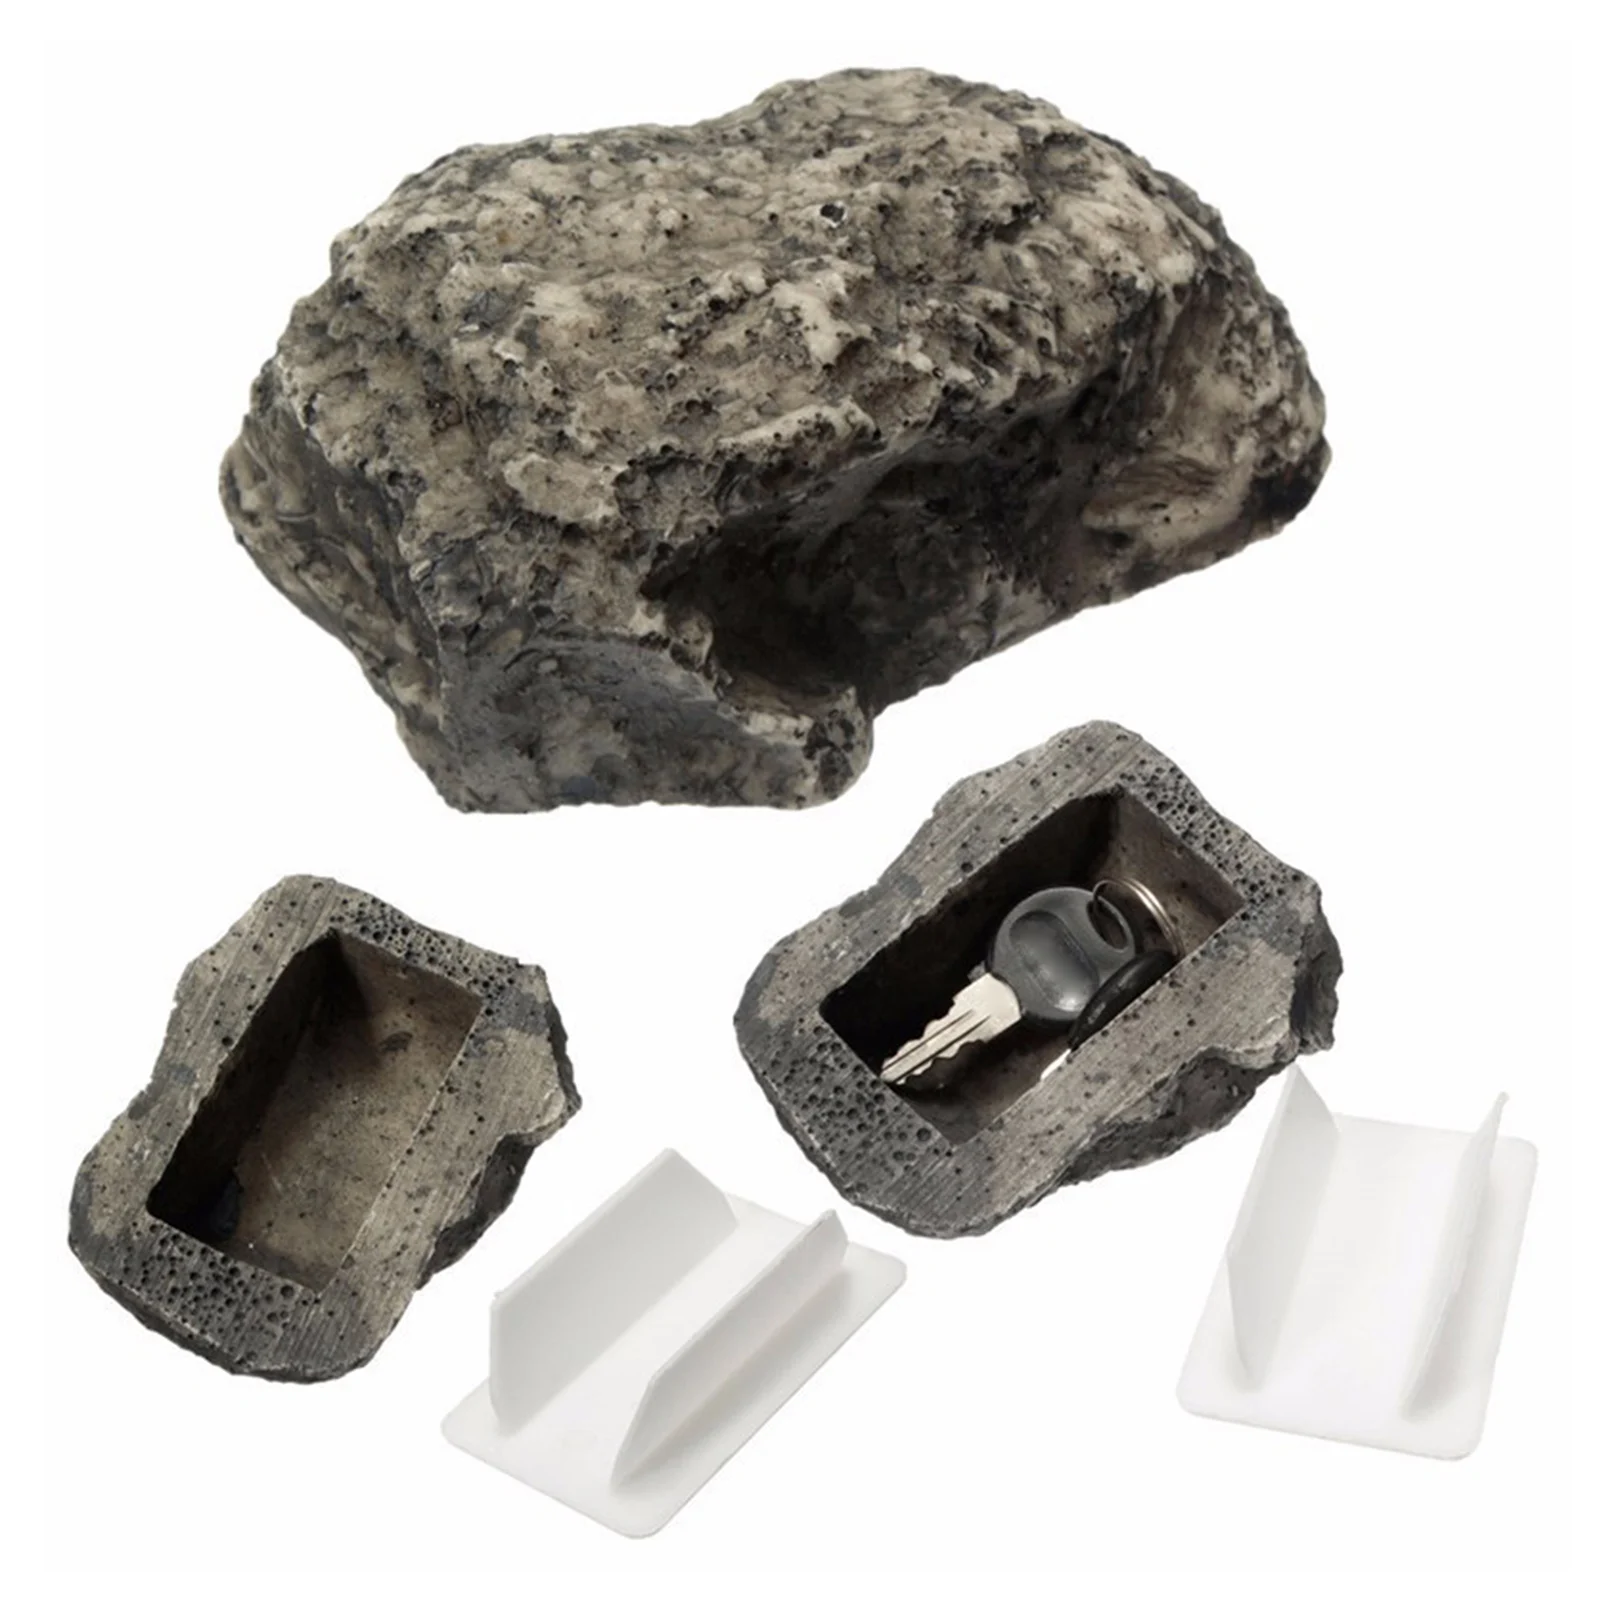 Hide a Spare Key Fake Rock - Looks & Feels like Real Stone - Safe for Outdoor Garden or Yard, Geocaching